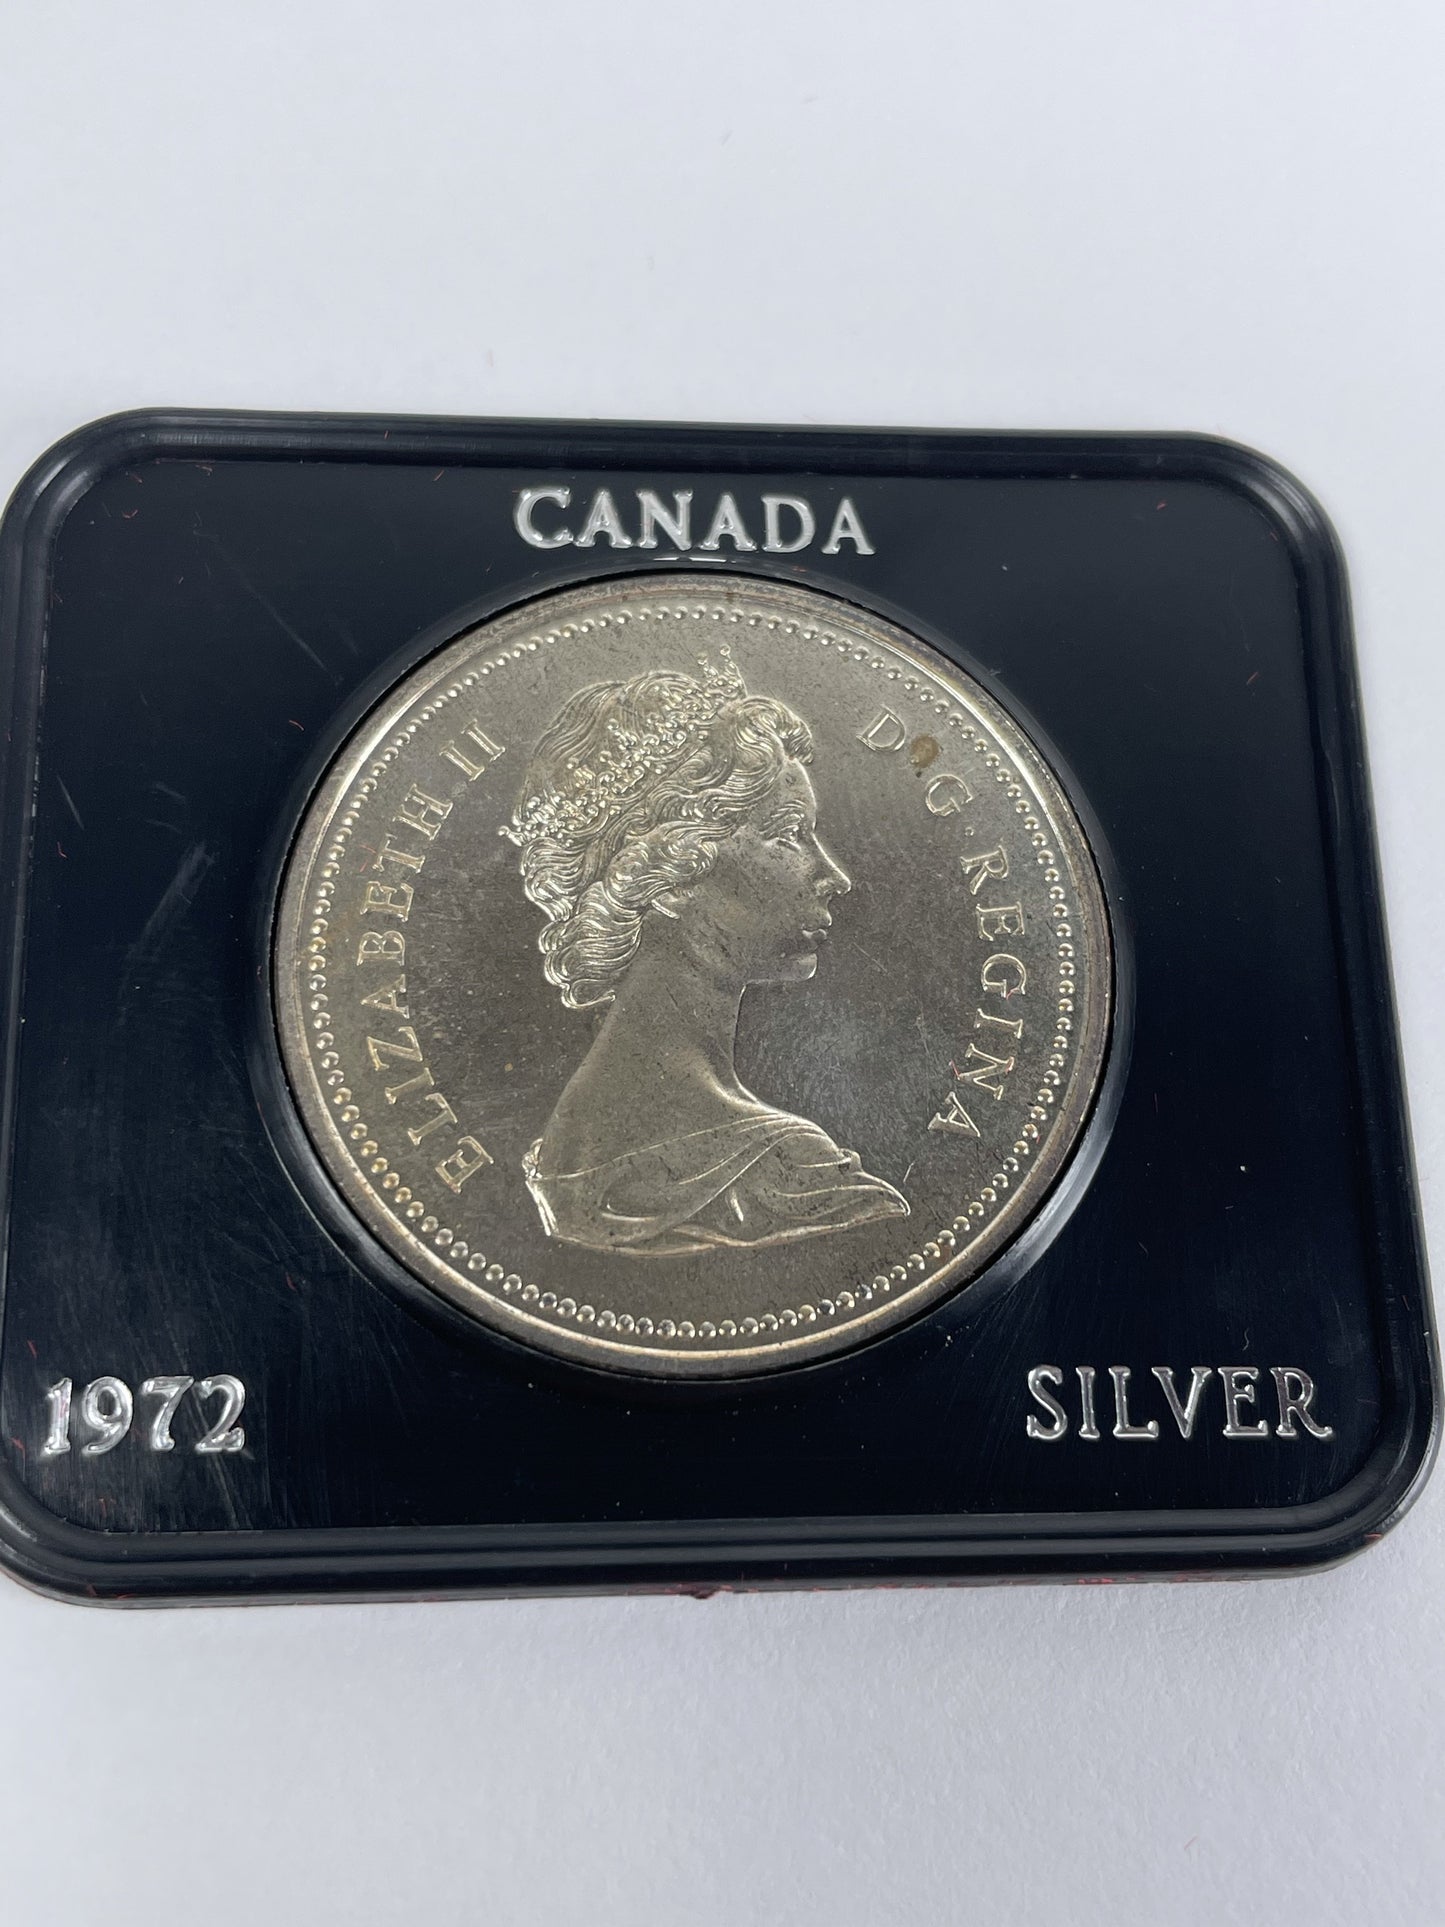 1972 Voyageur Canadian Silver Coin